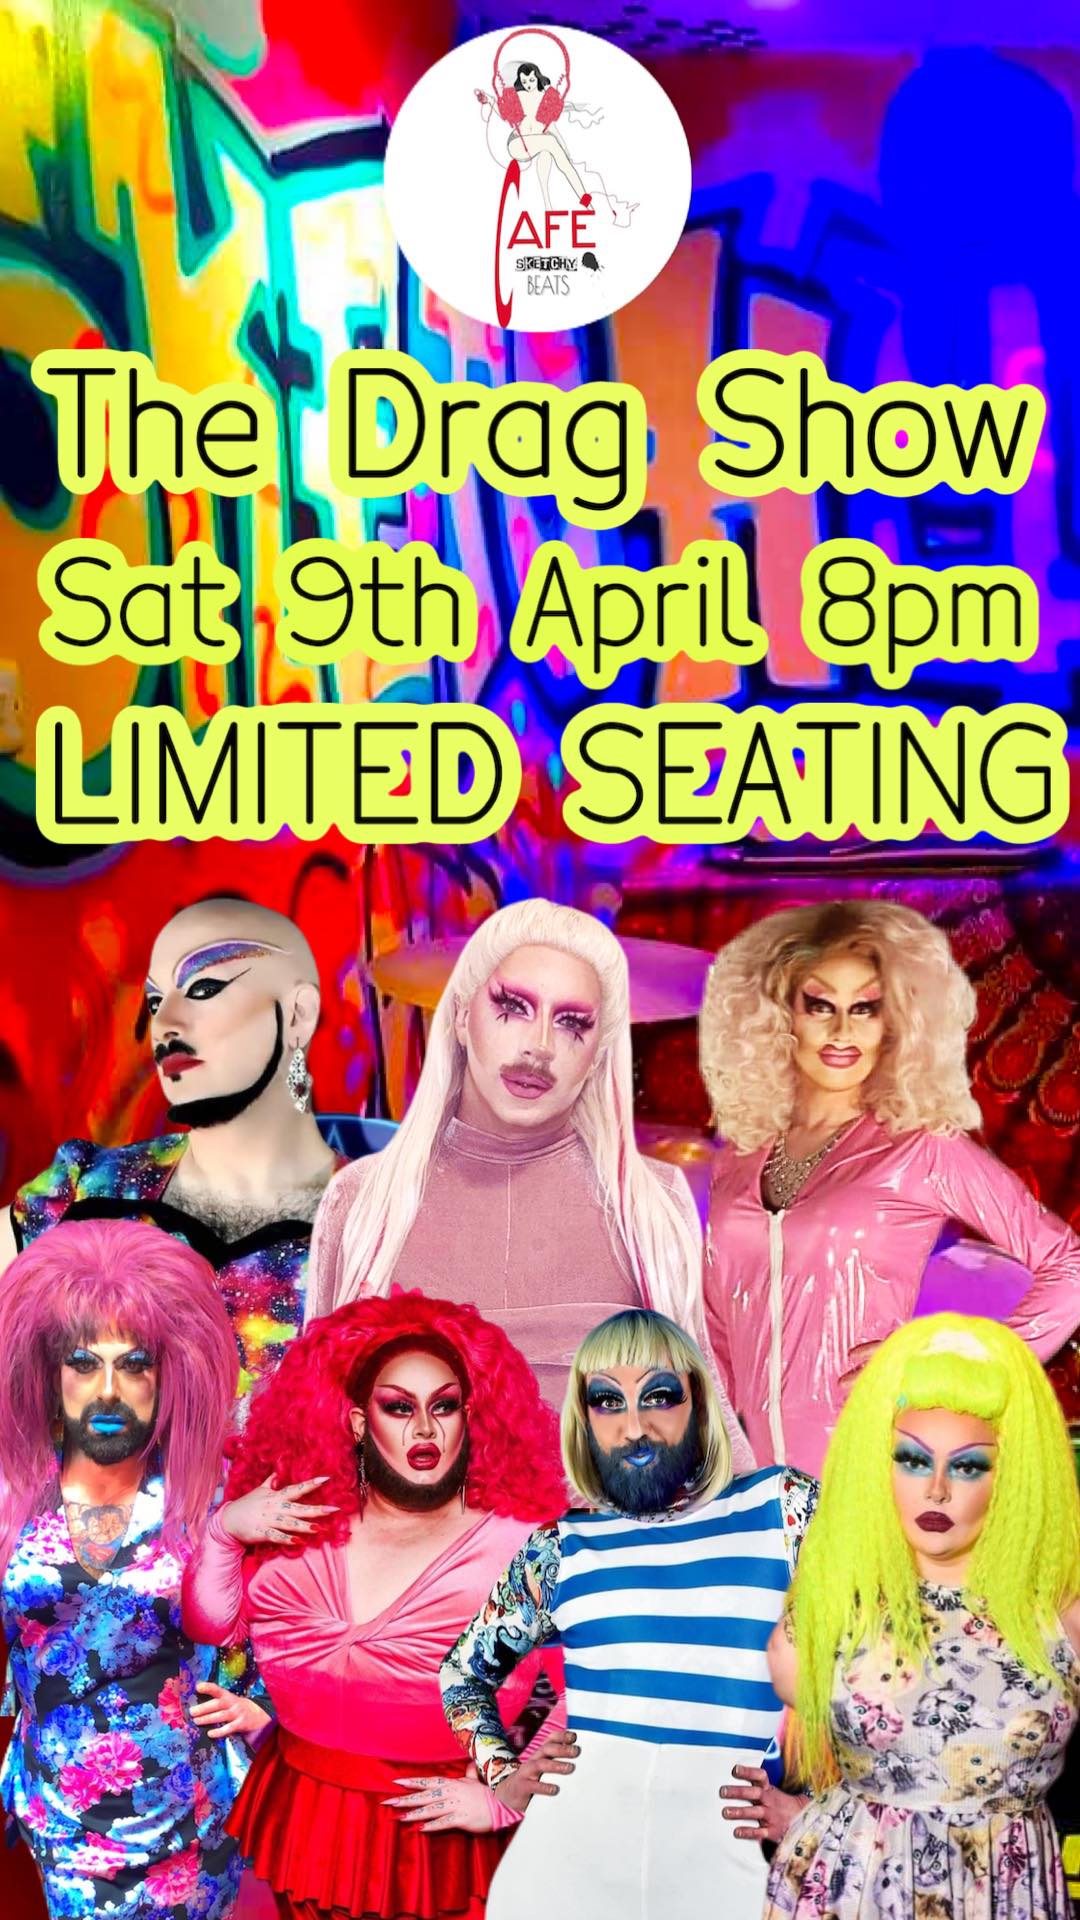 The Drag Show at Sketchy Beats Cafe in Edinburgh